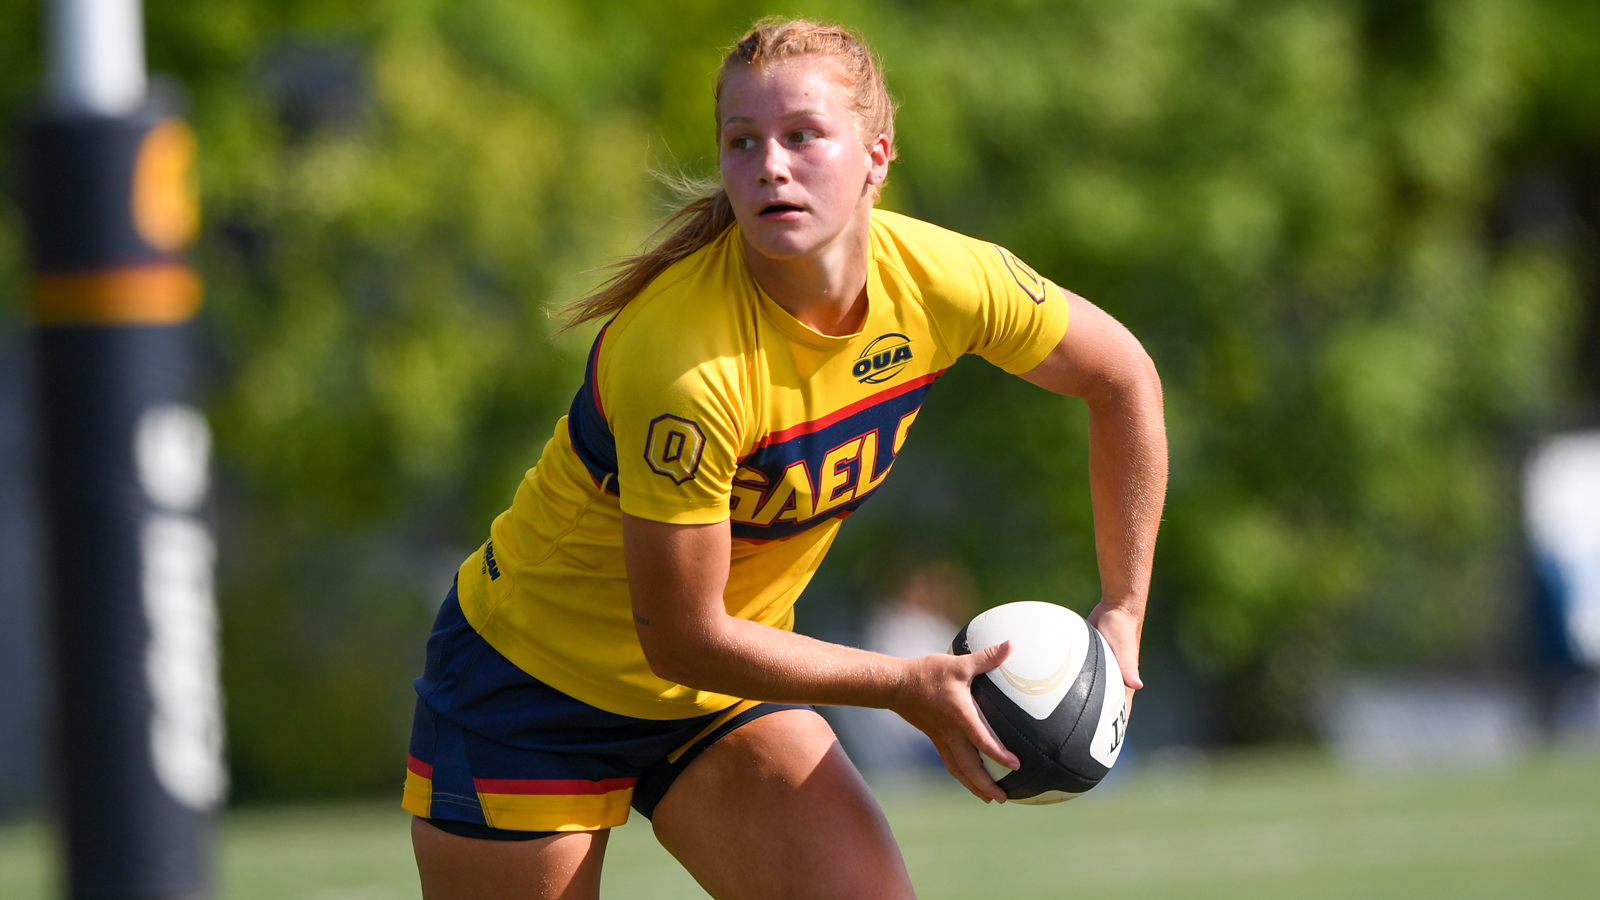 Queen's women's rugby player on the field about to pass the ball